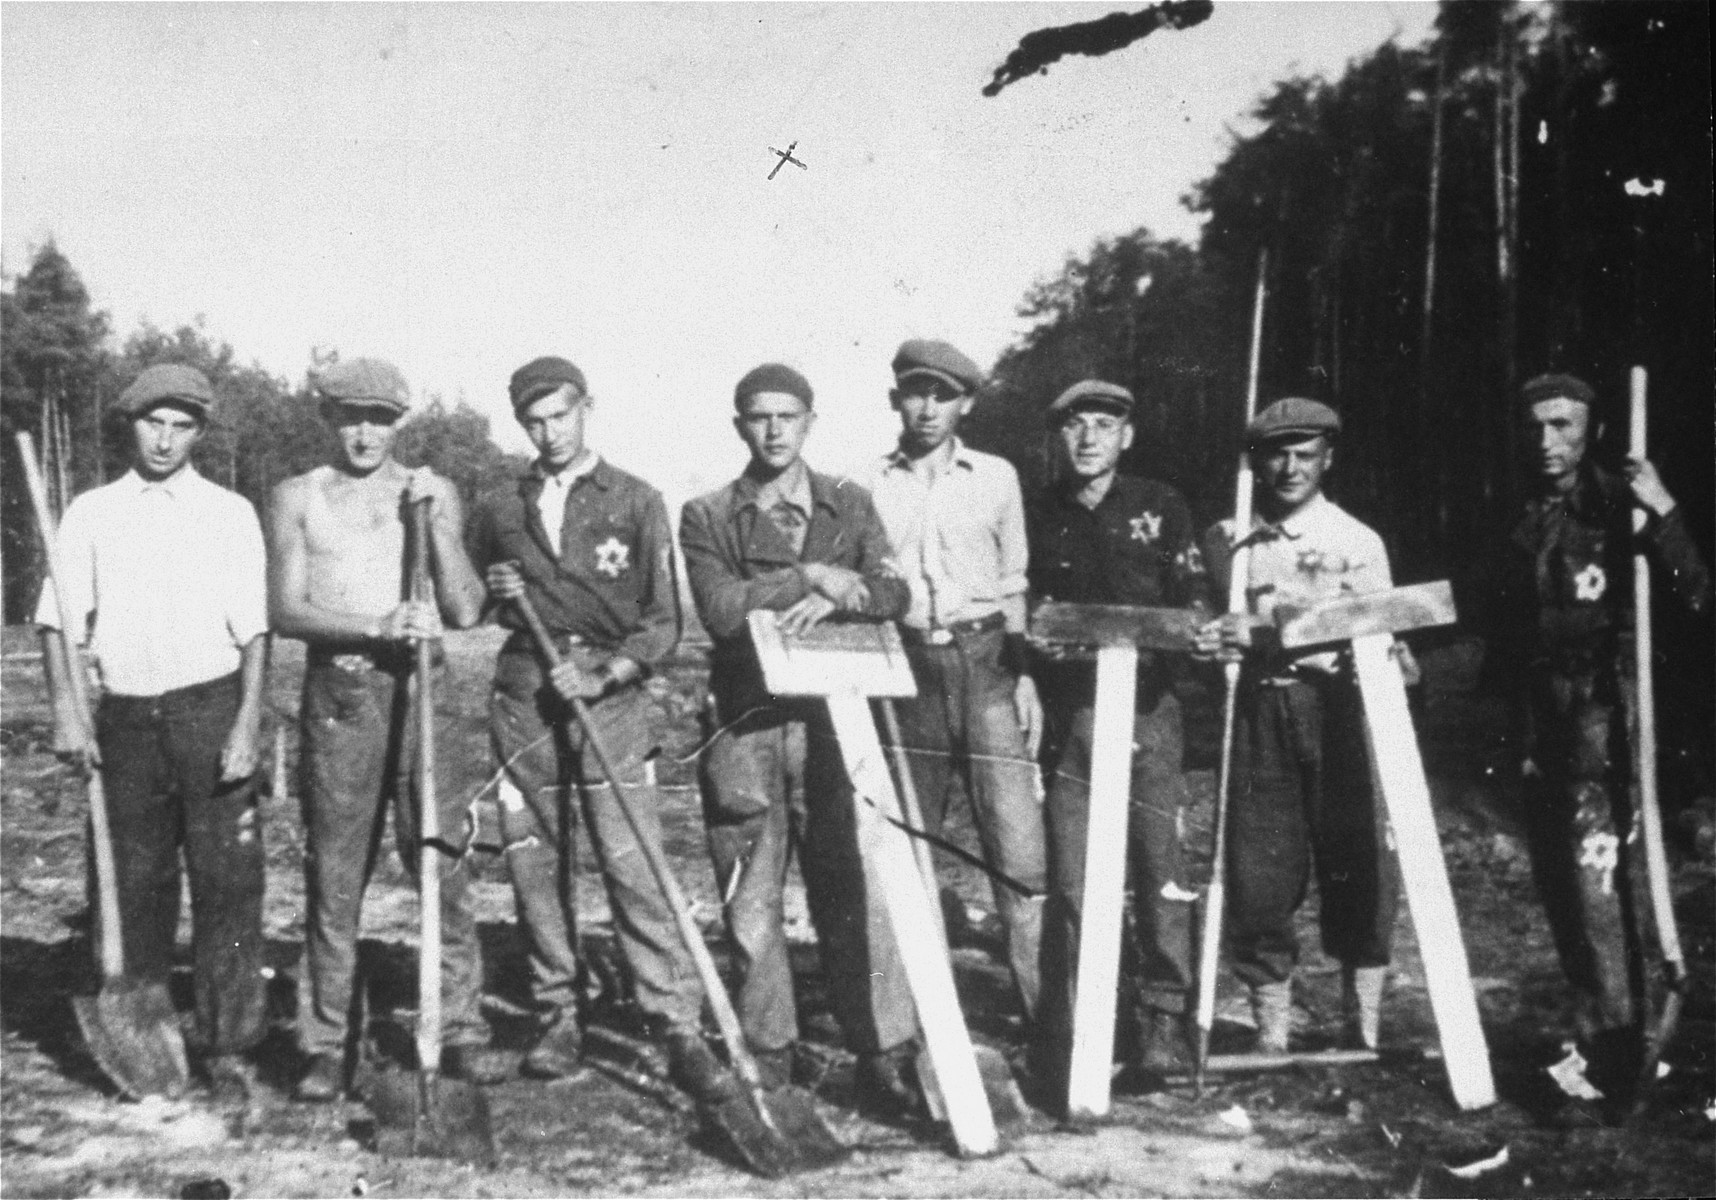 Group portrait Jewish forced laborers who worked on the construction of the autobahn in Geppersdorf, Germany.  

Among those pictured is Abram Stone (fourth from the left).